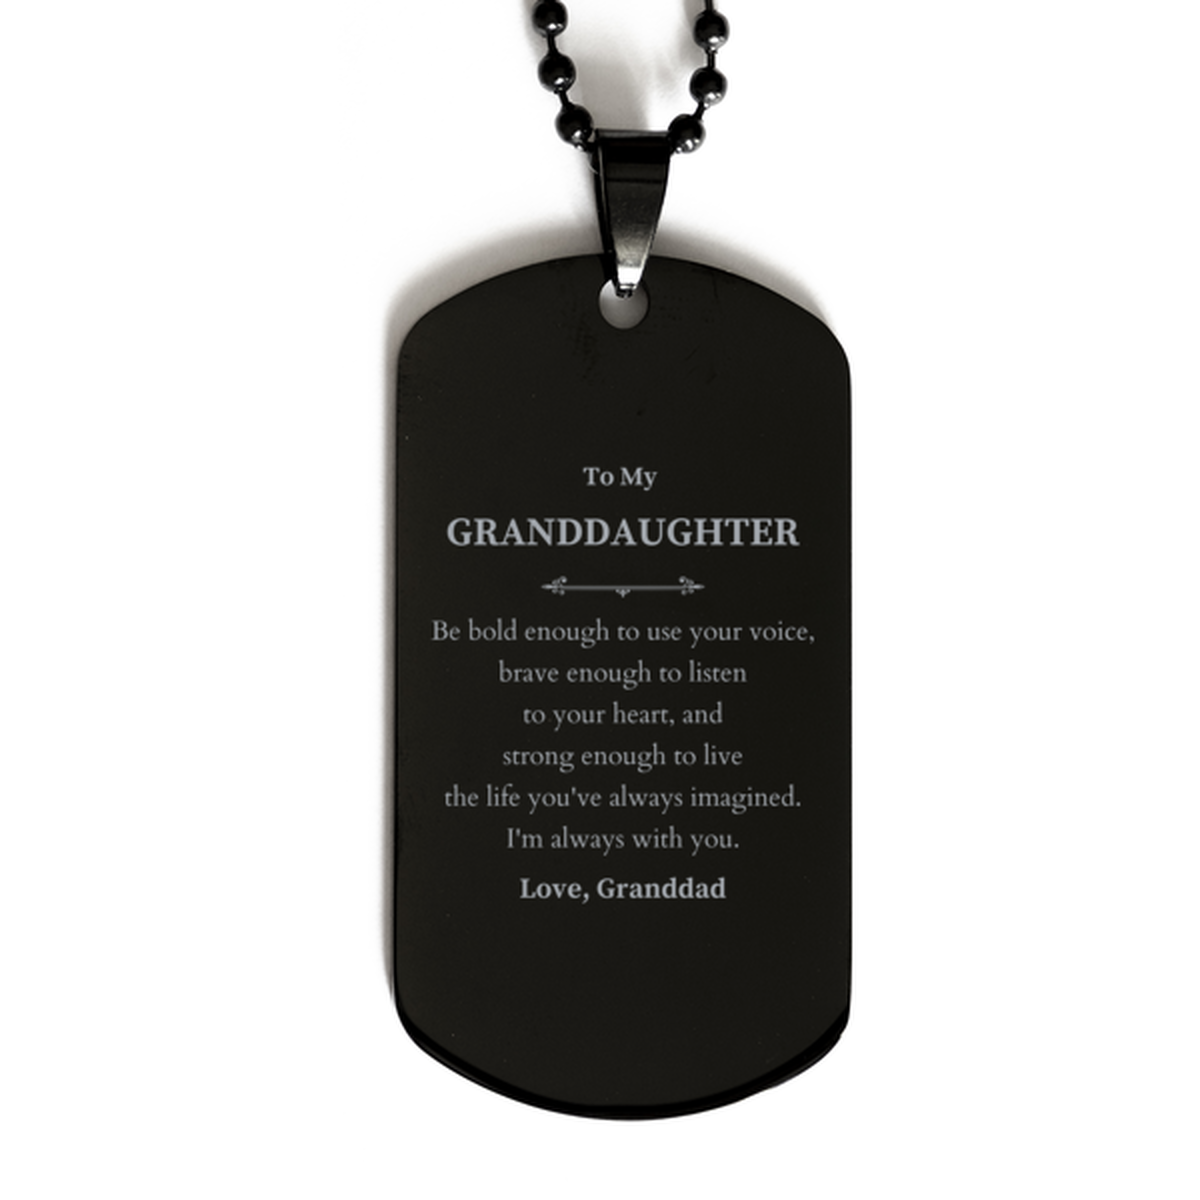 Keepsake Granddaughter Black Dog Tag Gift Idea Graduation Christmas Birthday Granddaughter from Granddad, Granddaughter Be bold enough to use your voice, brave enough to listen to your heart. Love, Granddad